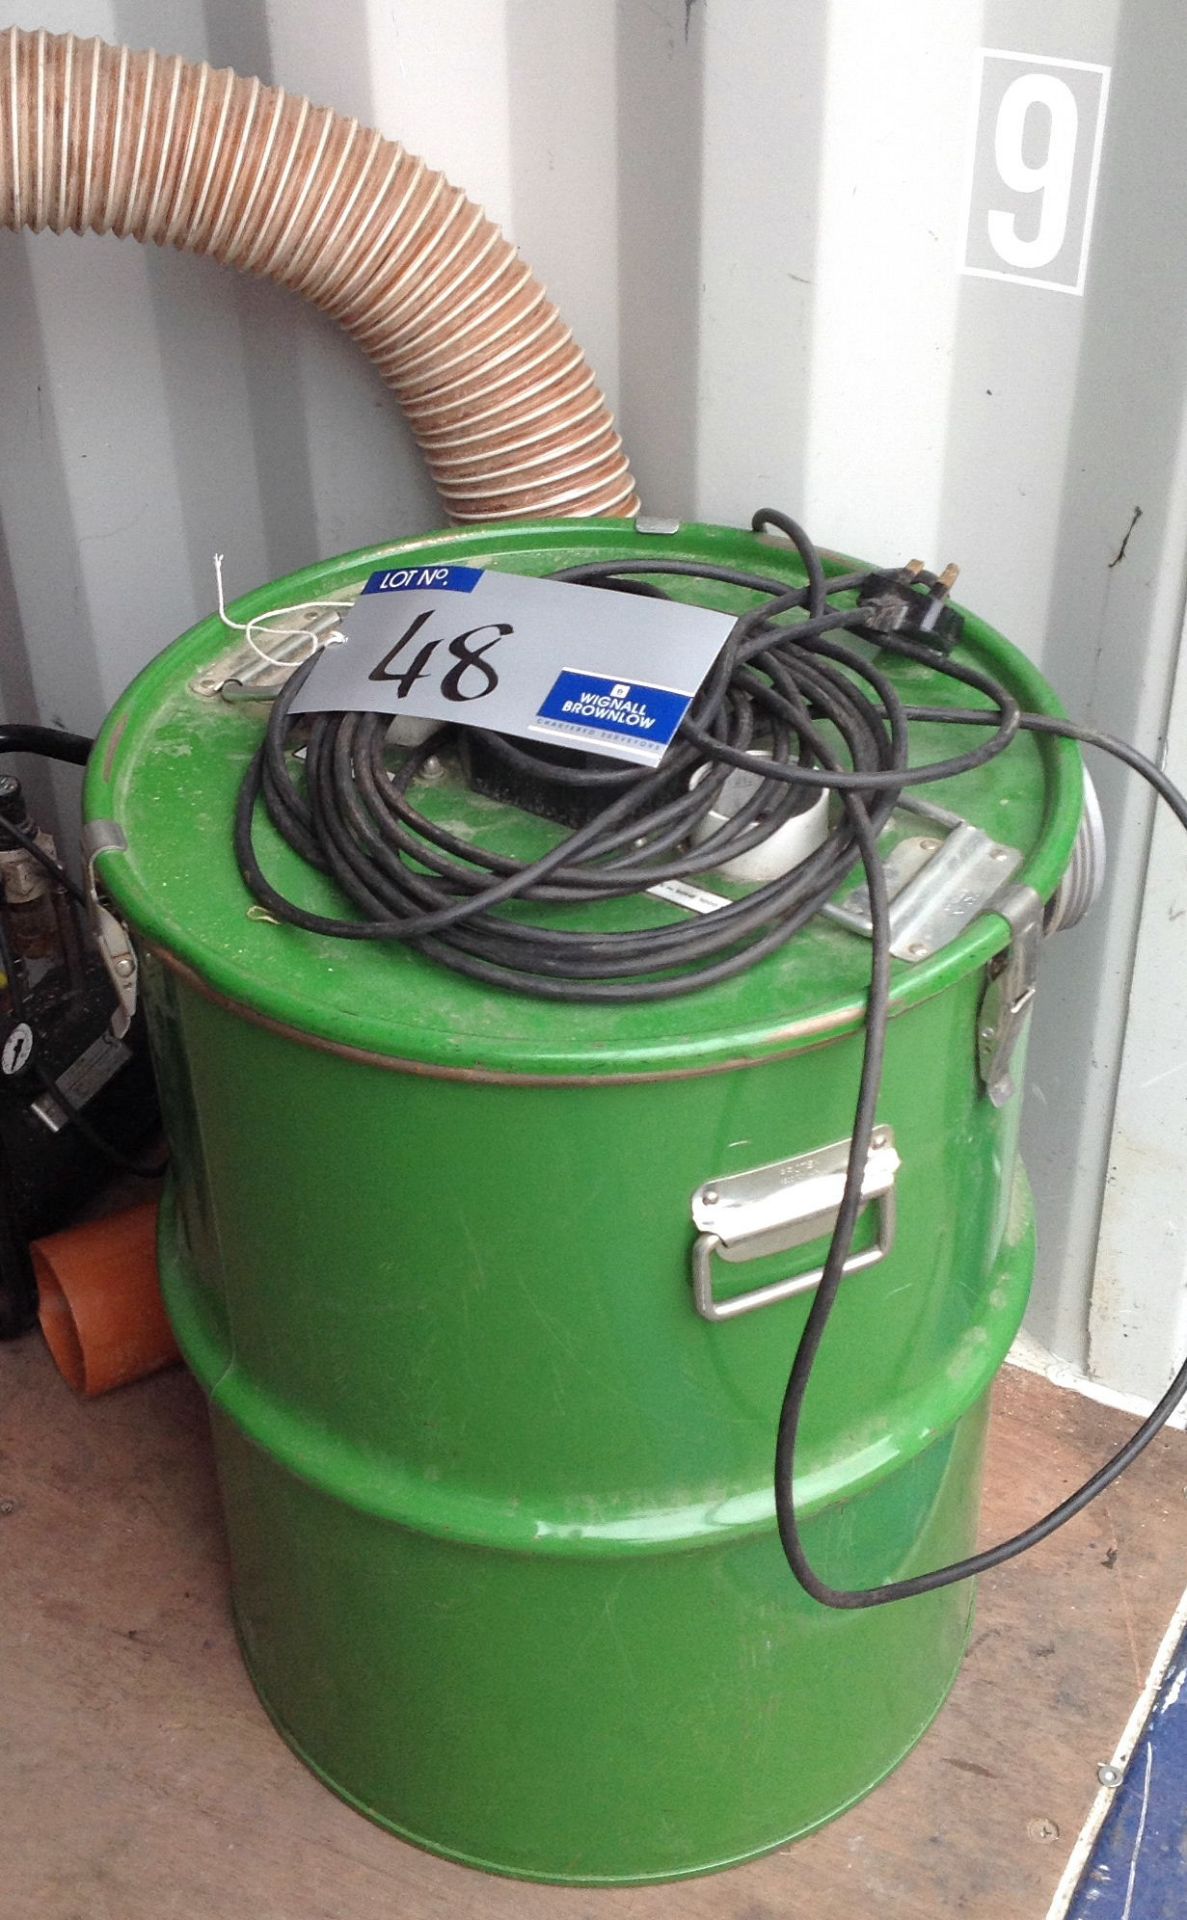 A Tyme Machines Industrial Vacuum Cleaner with hose (240v).